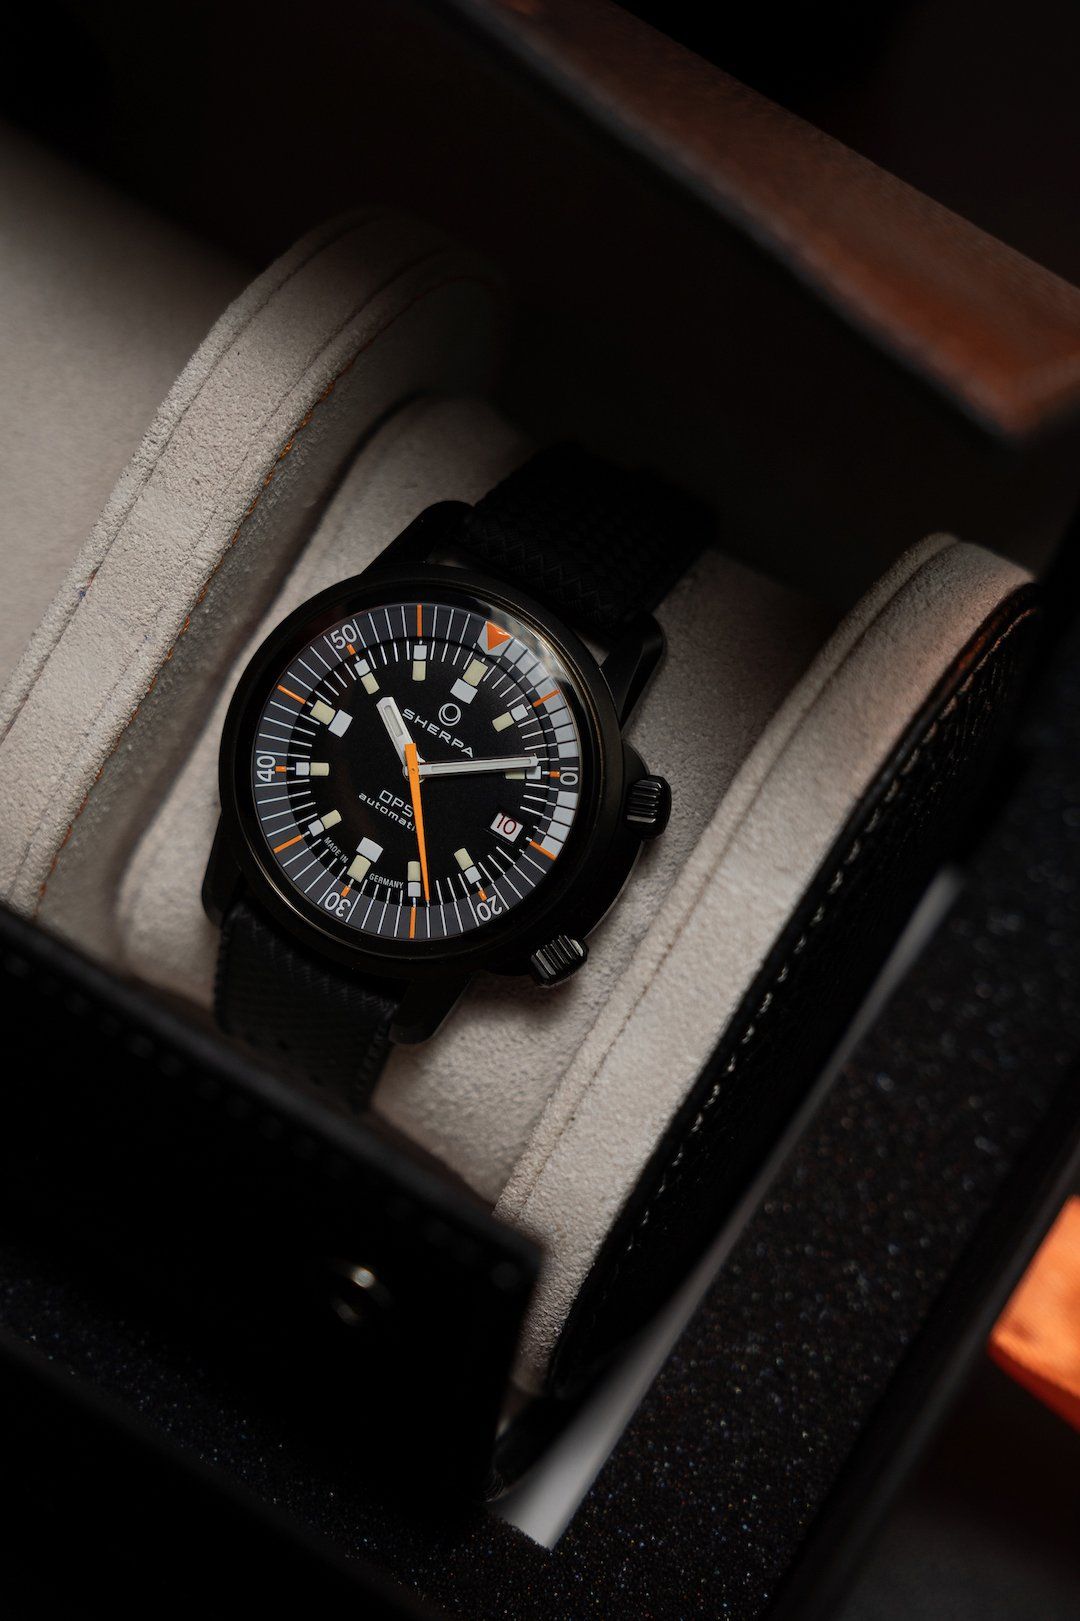 Sherpa brand revives true super compressor dive watches after 60 years